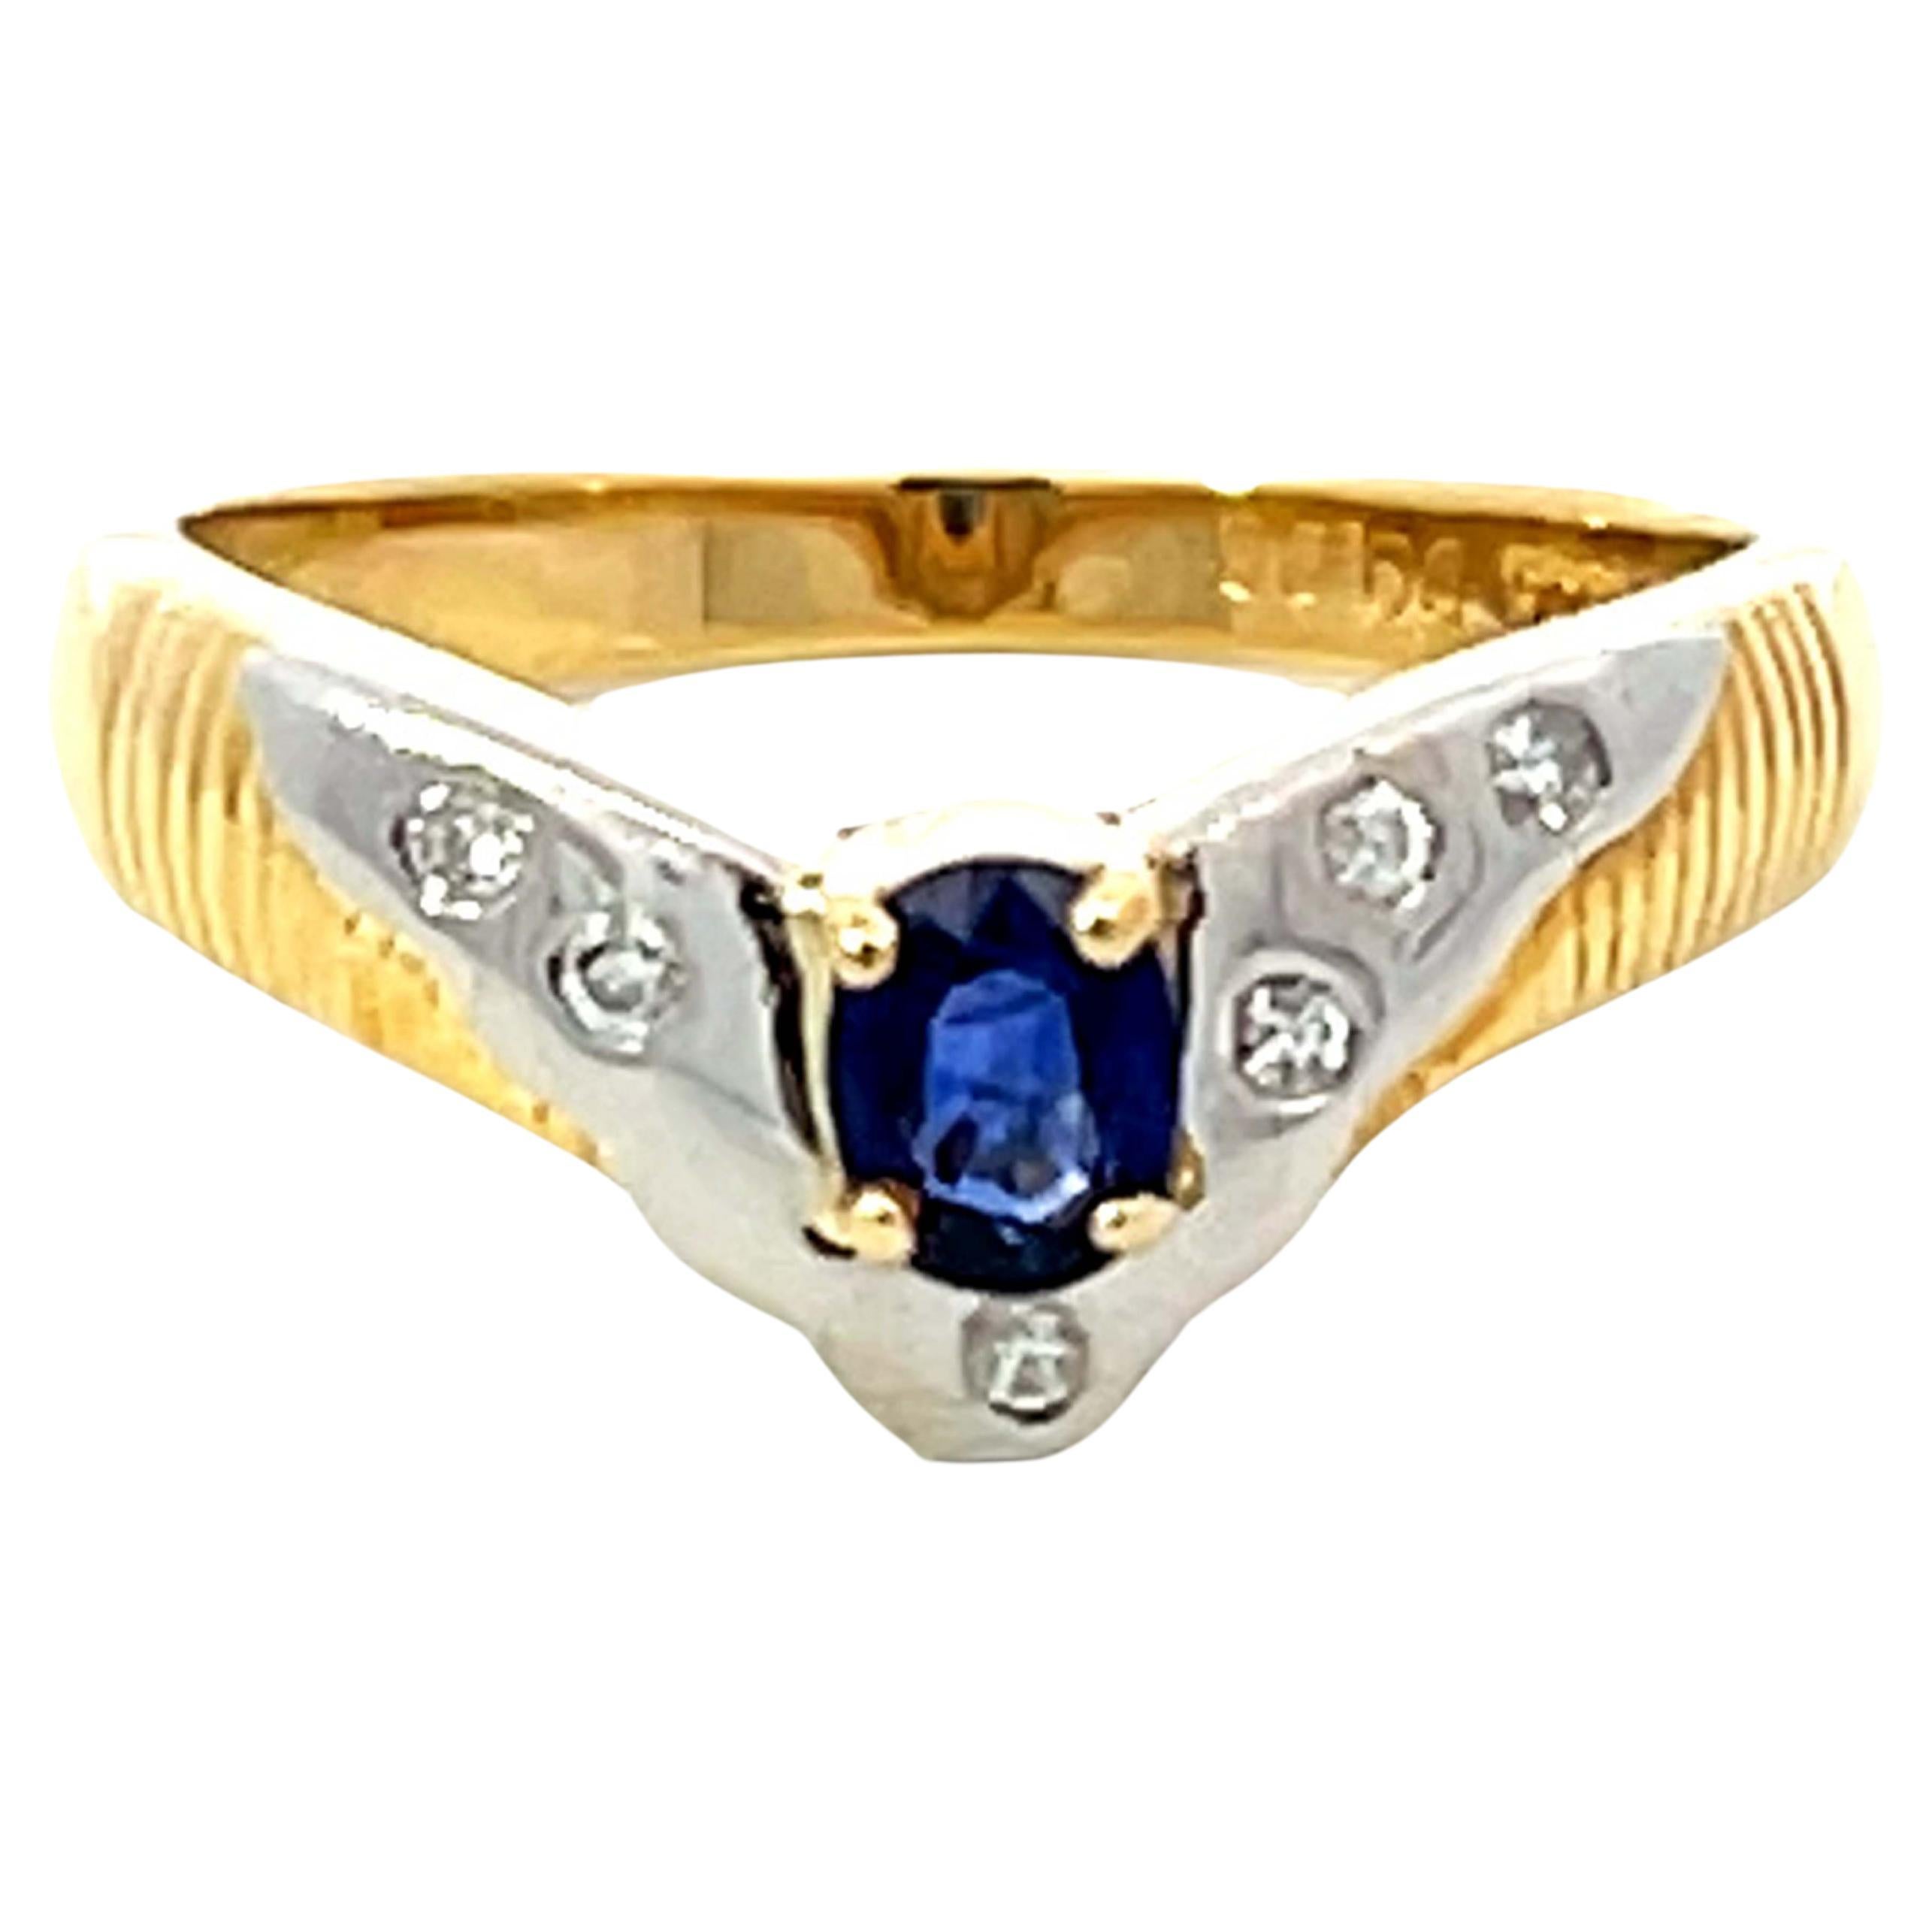 V Shaped Blue Sapphire and Diamond Ring in 18k Yellow Gold and Platinum